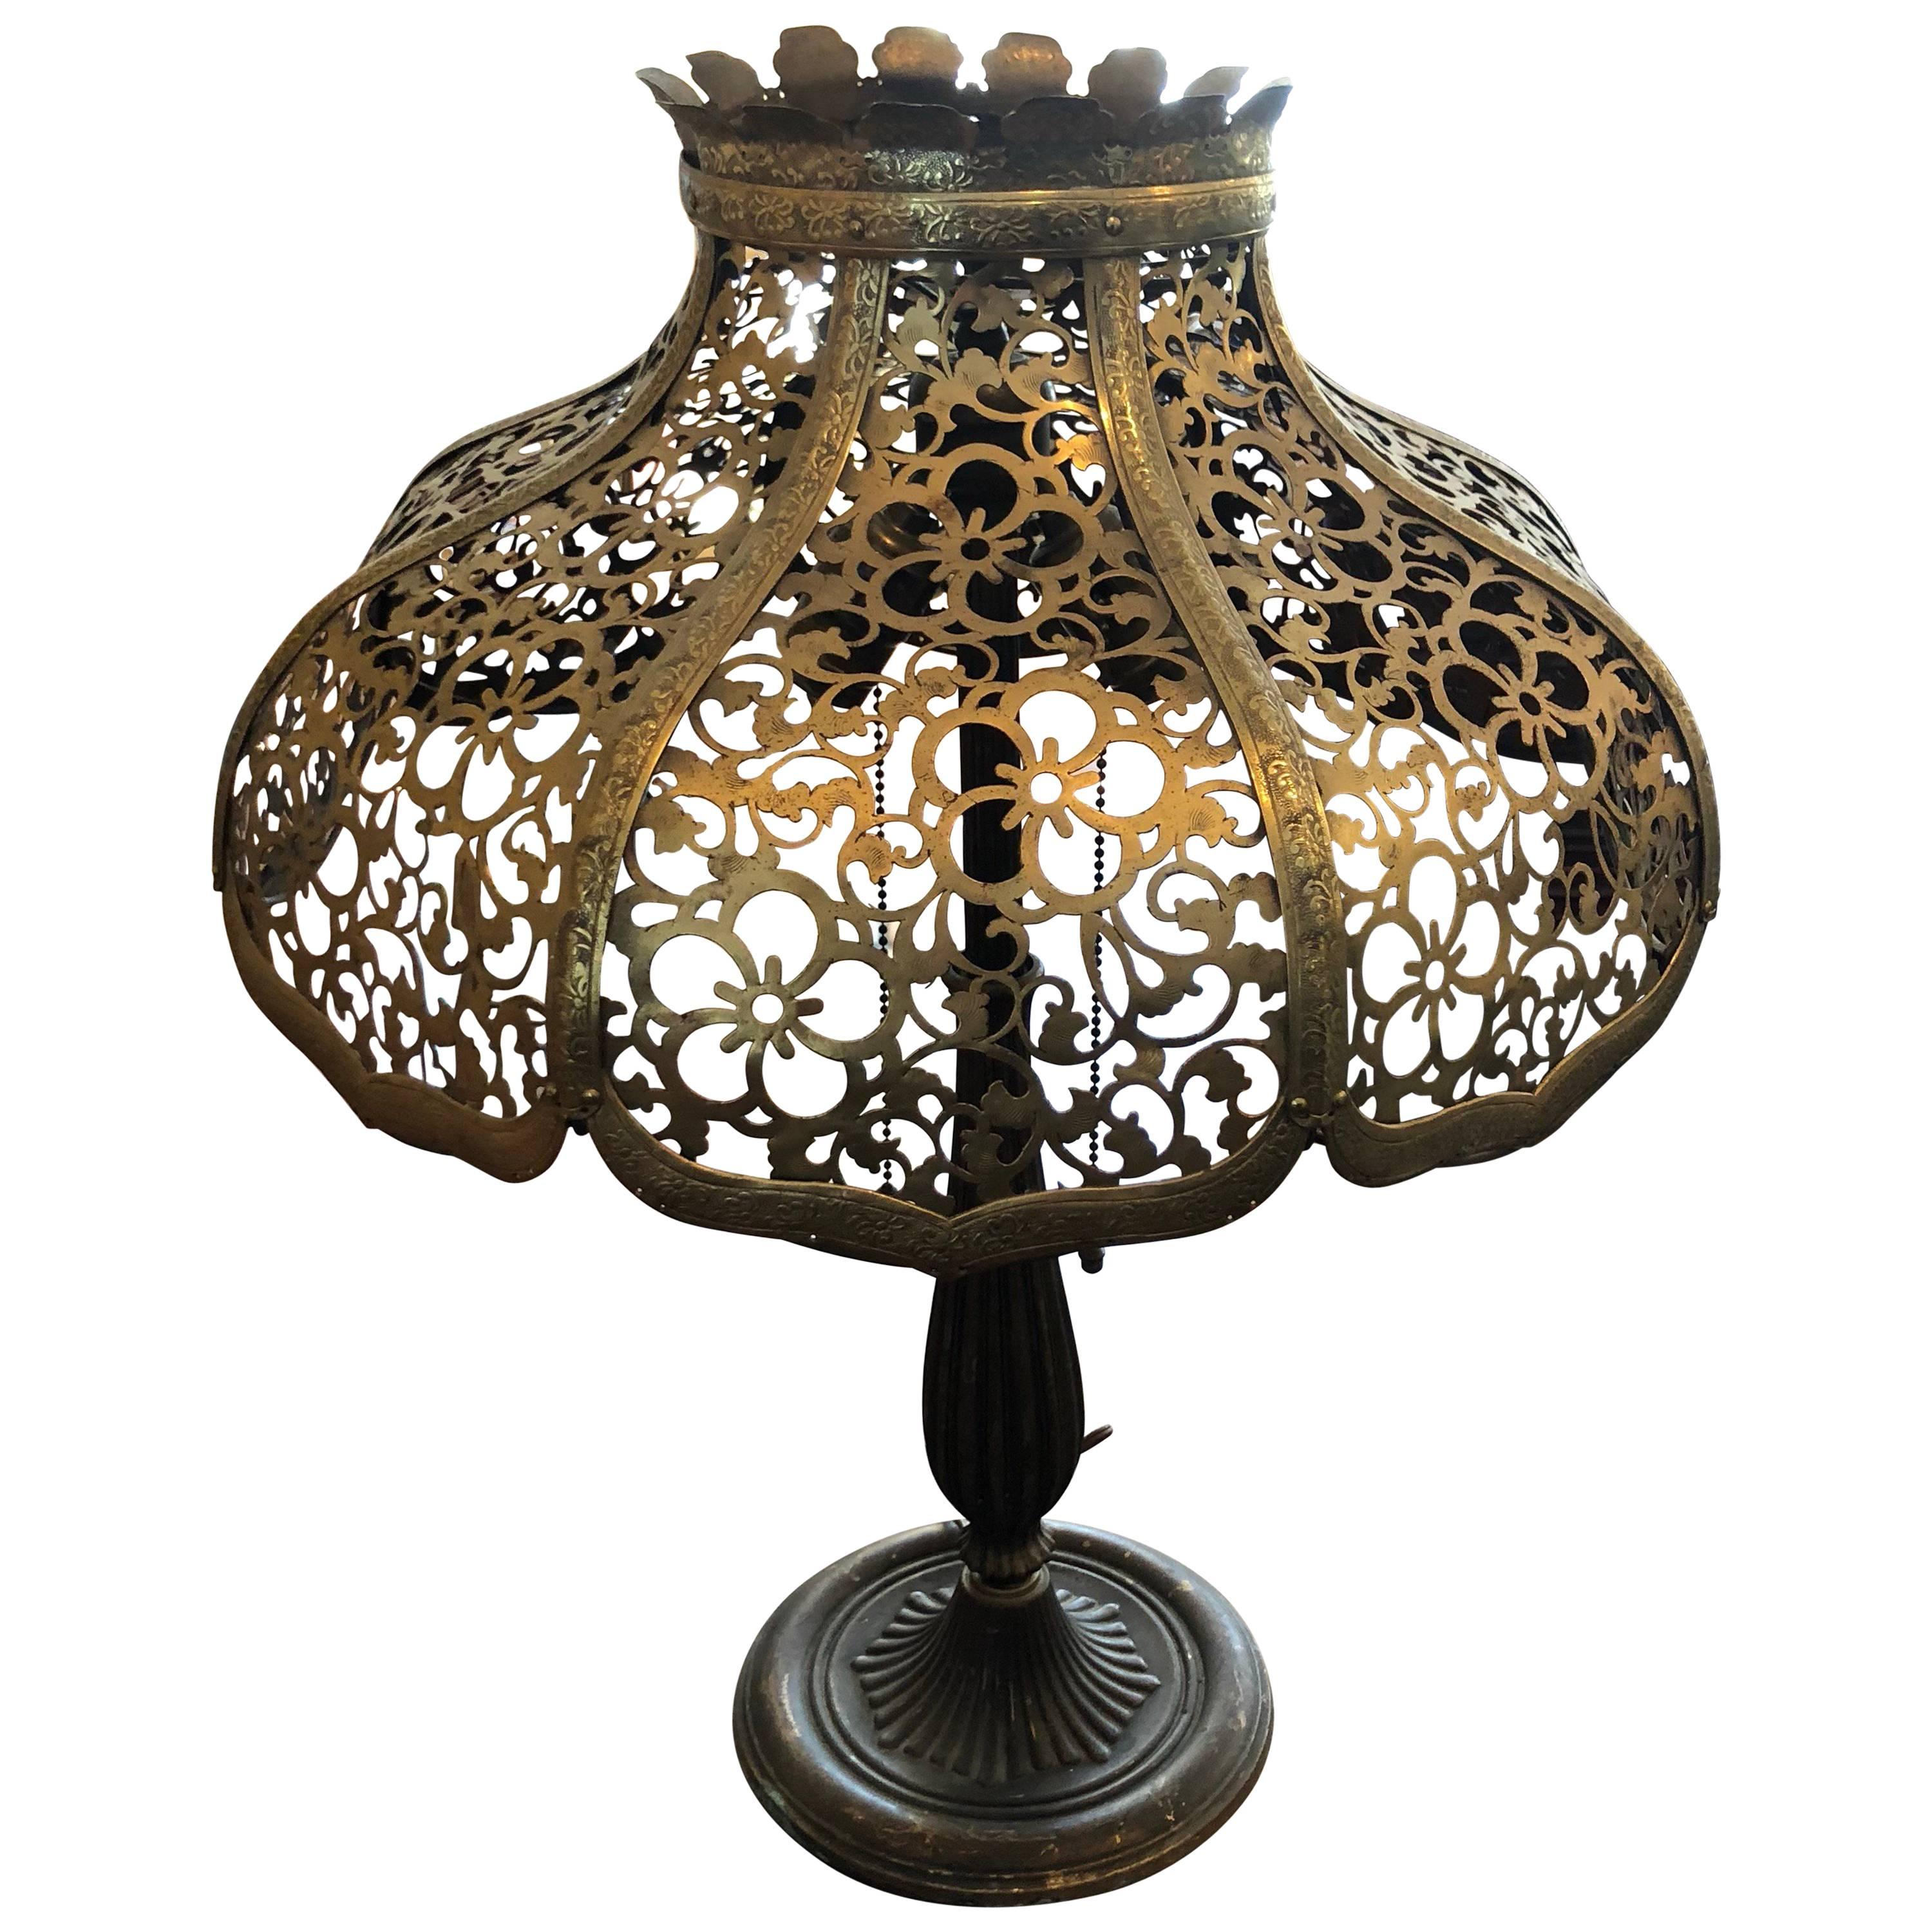 Antique Gilt Lamp with Pierced Brass Shade by Miller